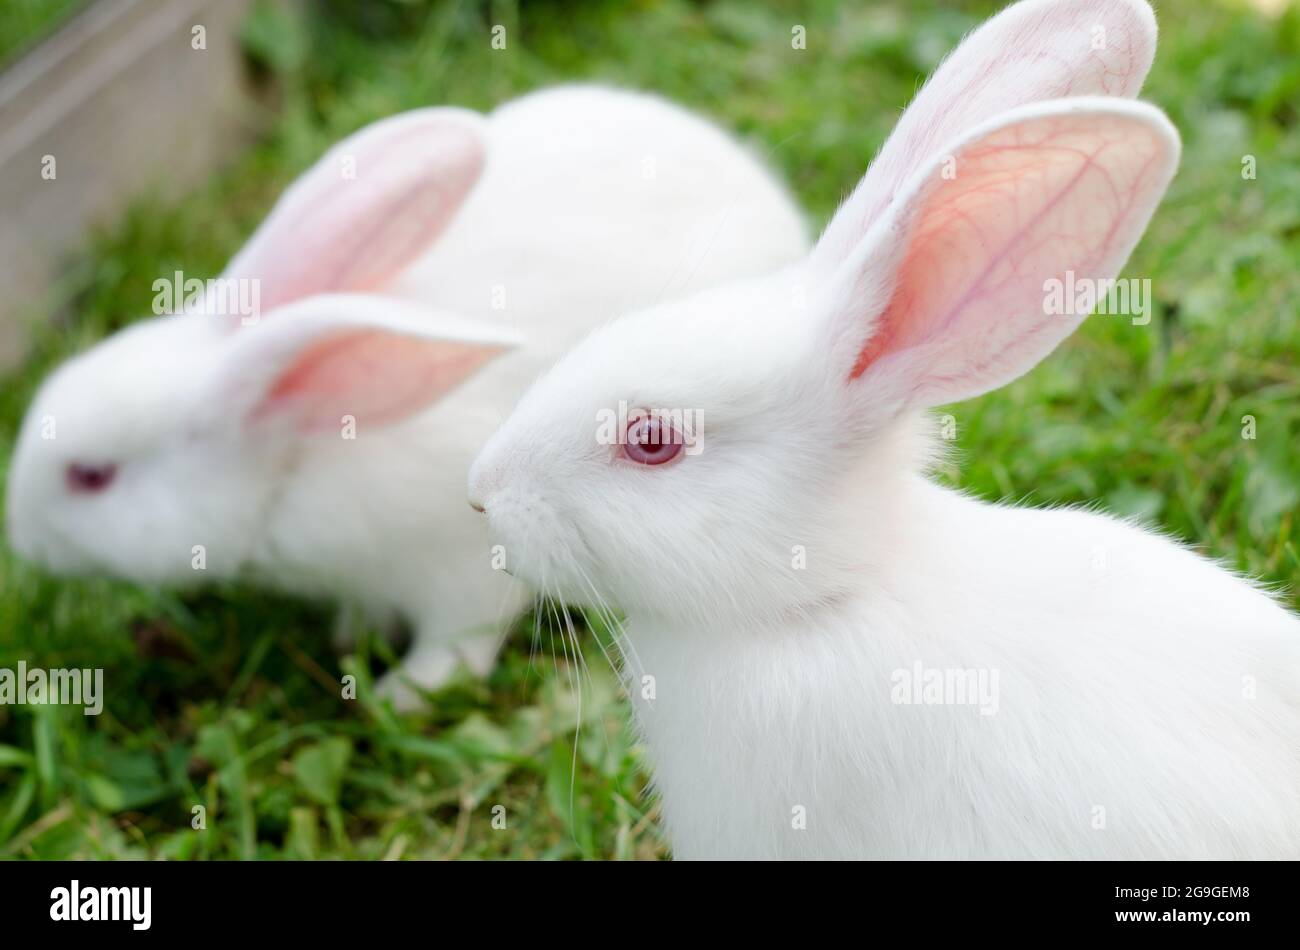 https://c8.alamy.com/comp/2G9GEM8/rabbit-white-small-2-months-old-breed-giant-sidin-in-a-corral-on-green-grass-natural-landscape-selective-focus-2G9GEM8.jpg